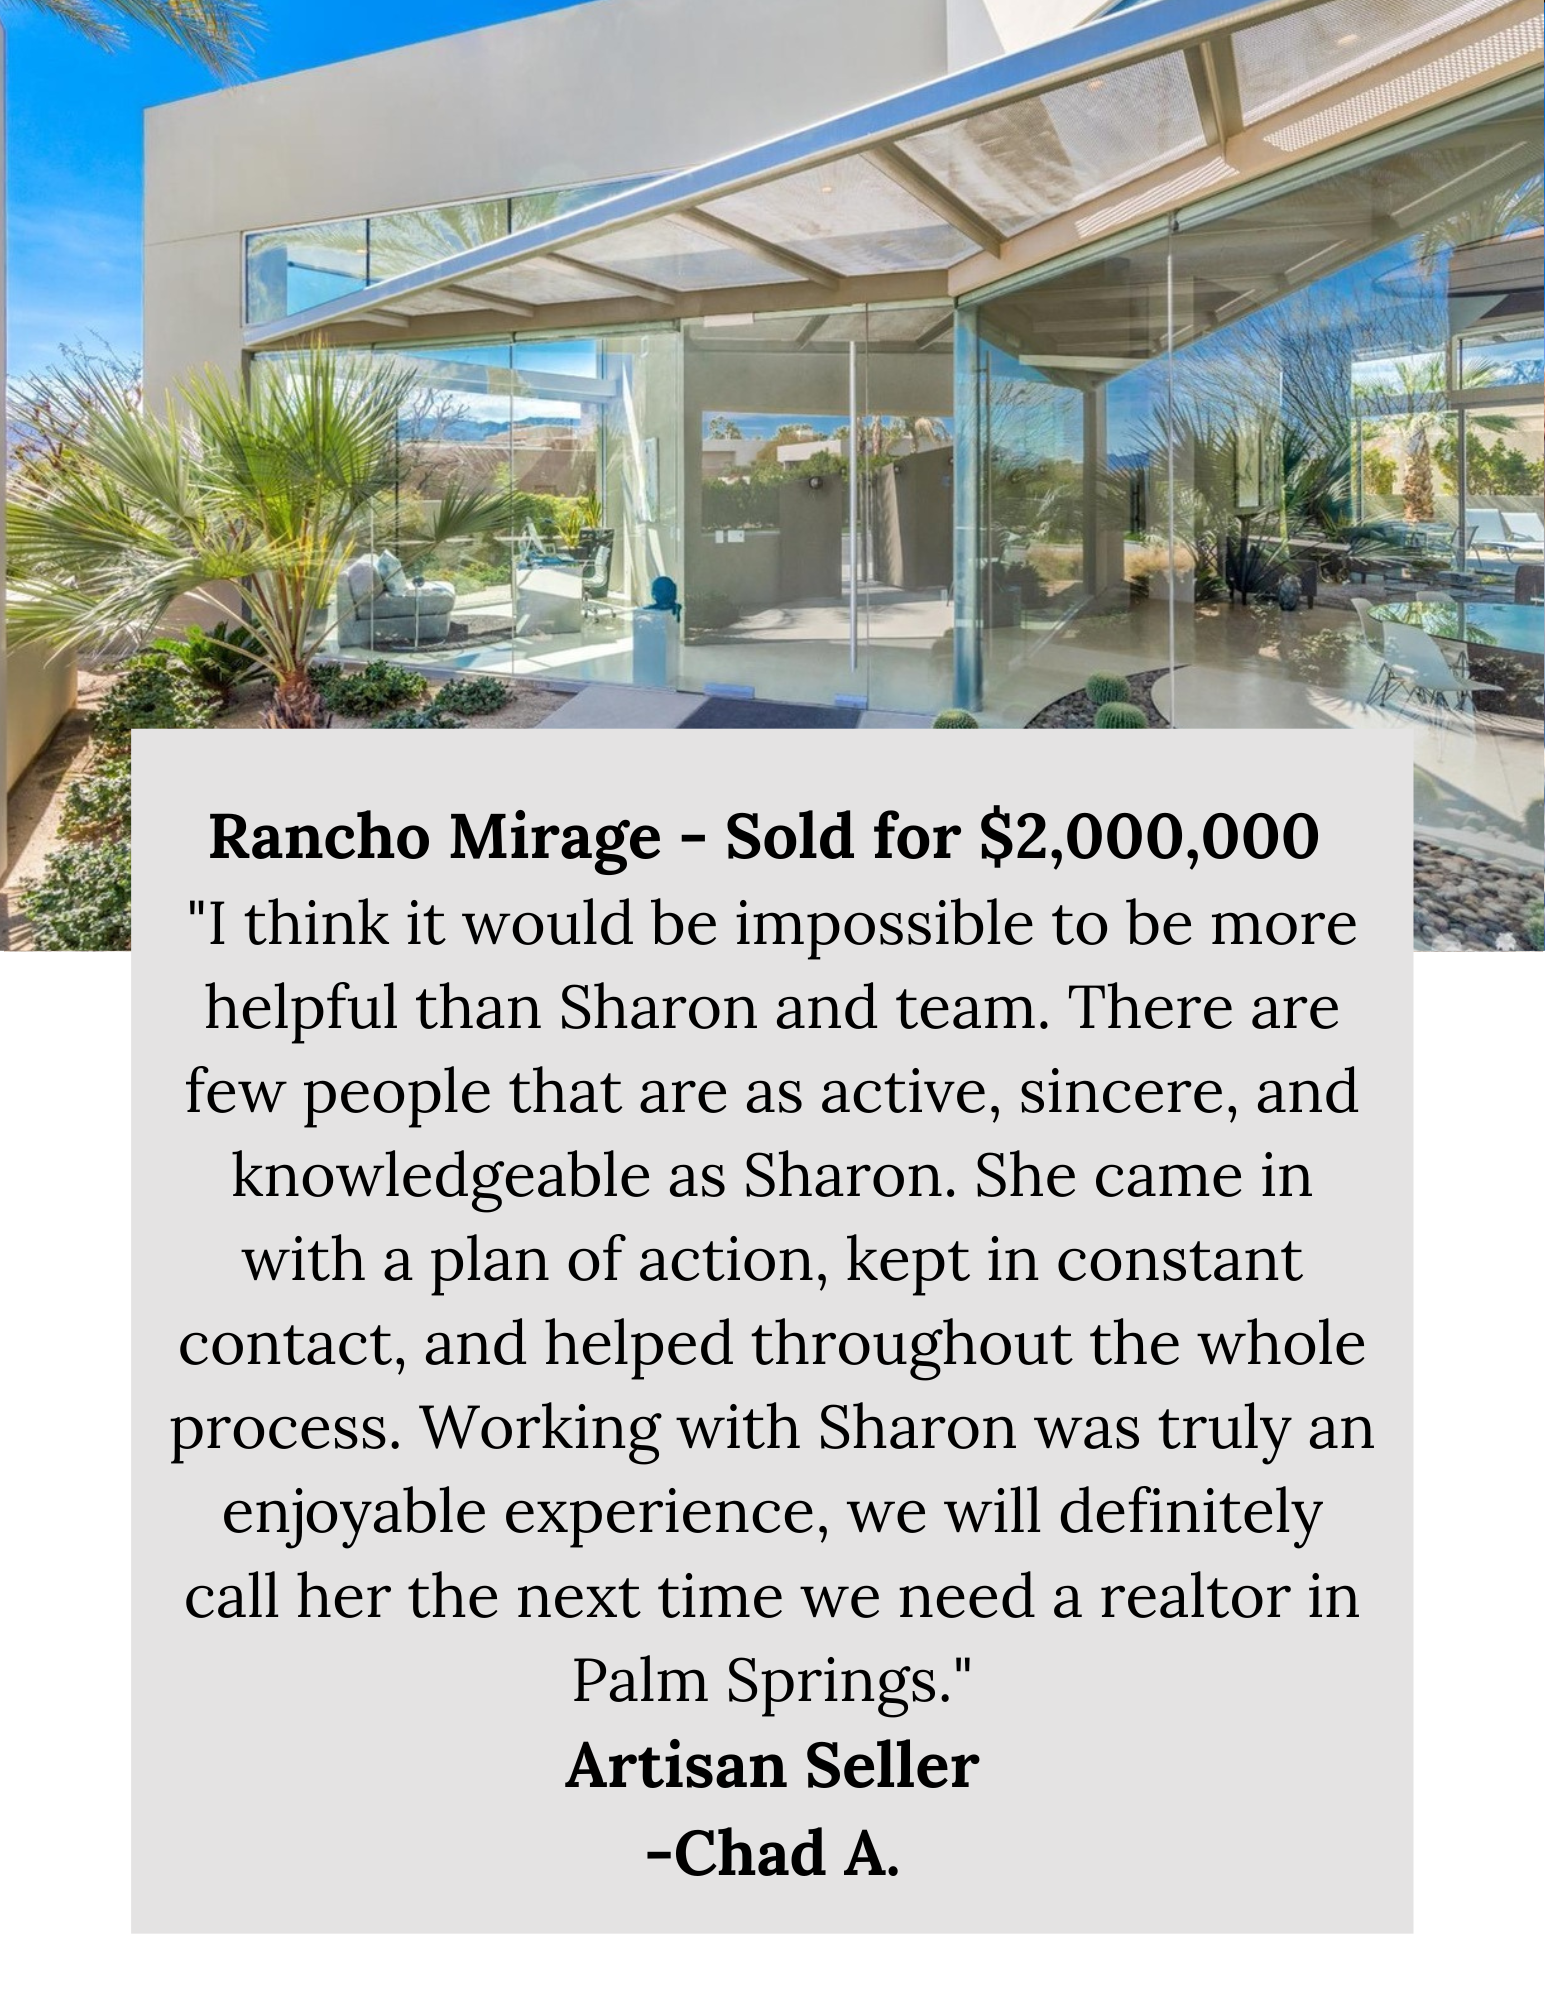 Rancho Mirage - Sold for $2,000,000 I think it would be impossible to be more helpful than Sharon and team. There are few people that are as active, sincere, and knowledgeable as Sharon. She came in with a plan of ac.png